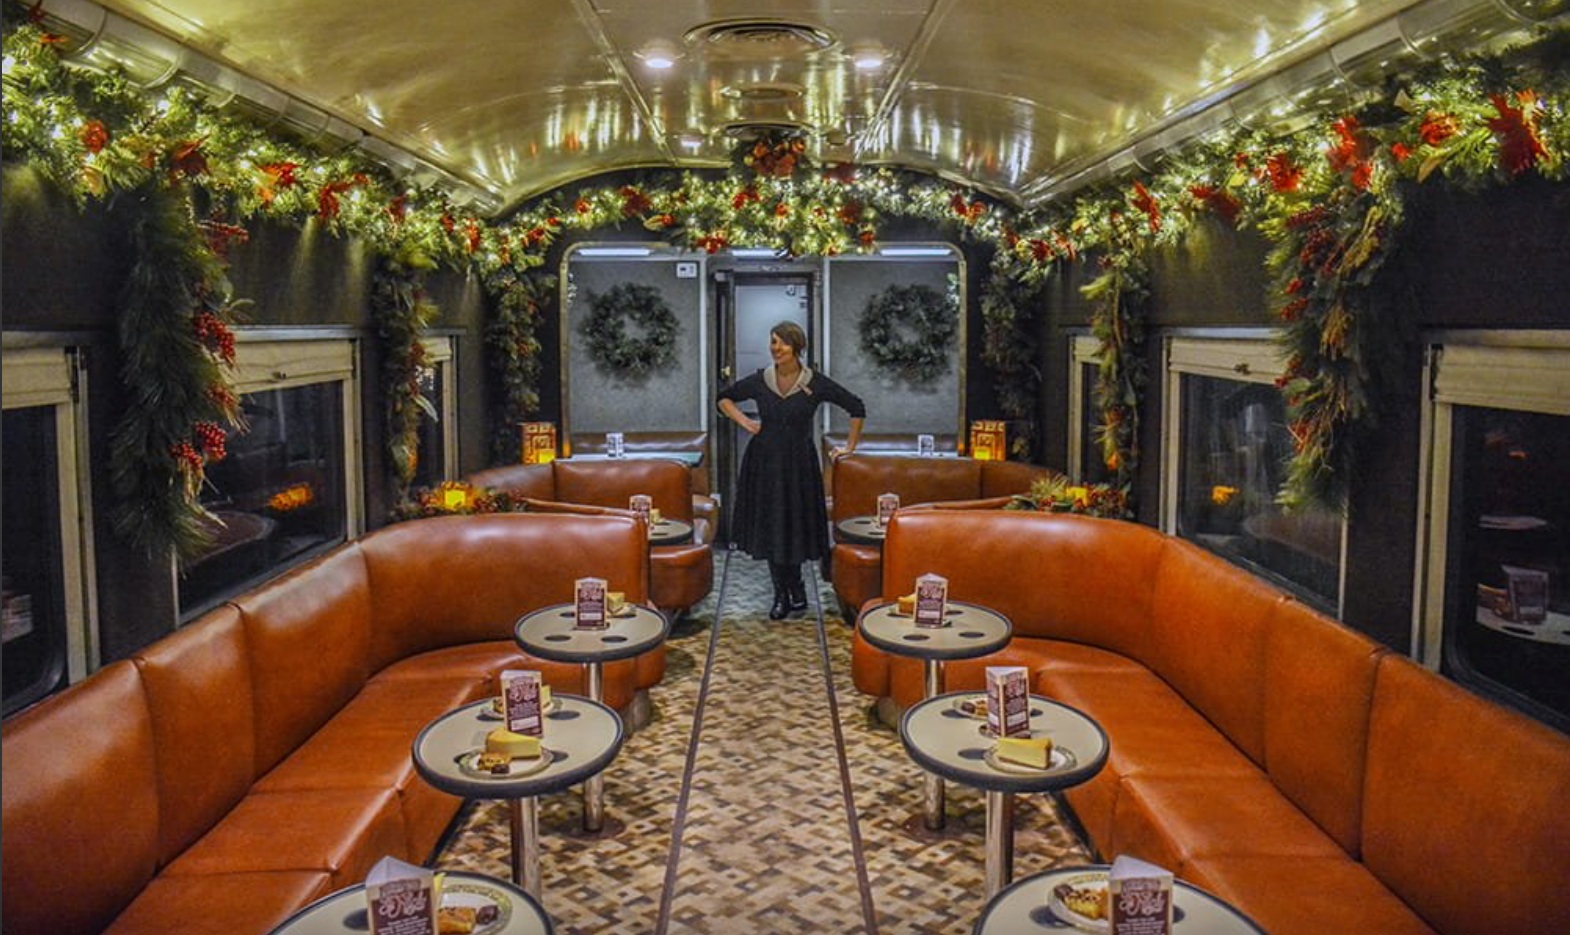 Cocktails in a luxury 1940s train car